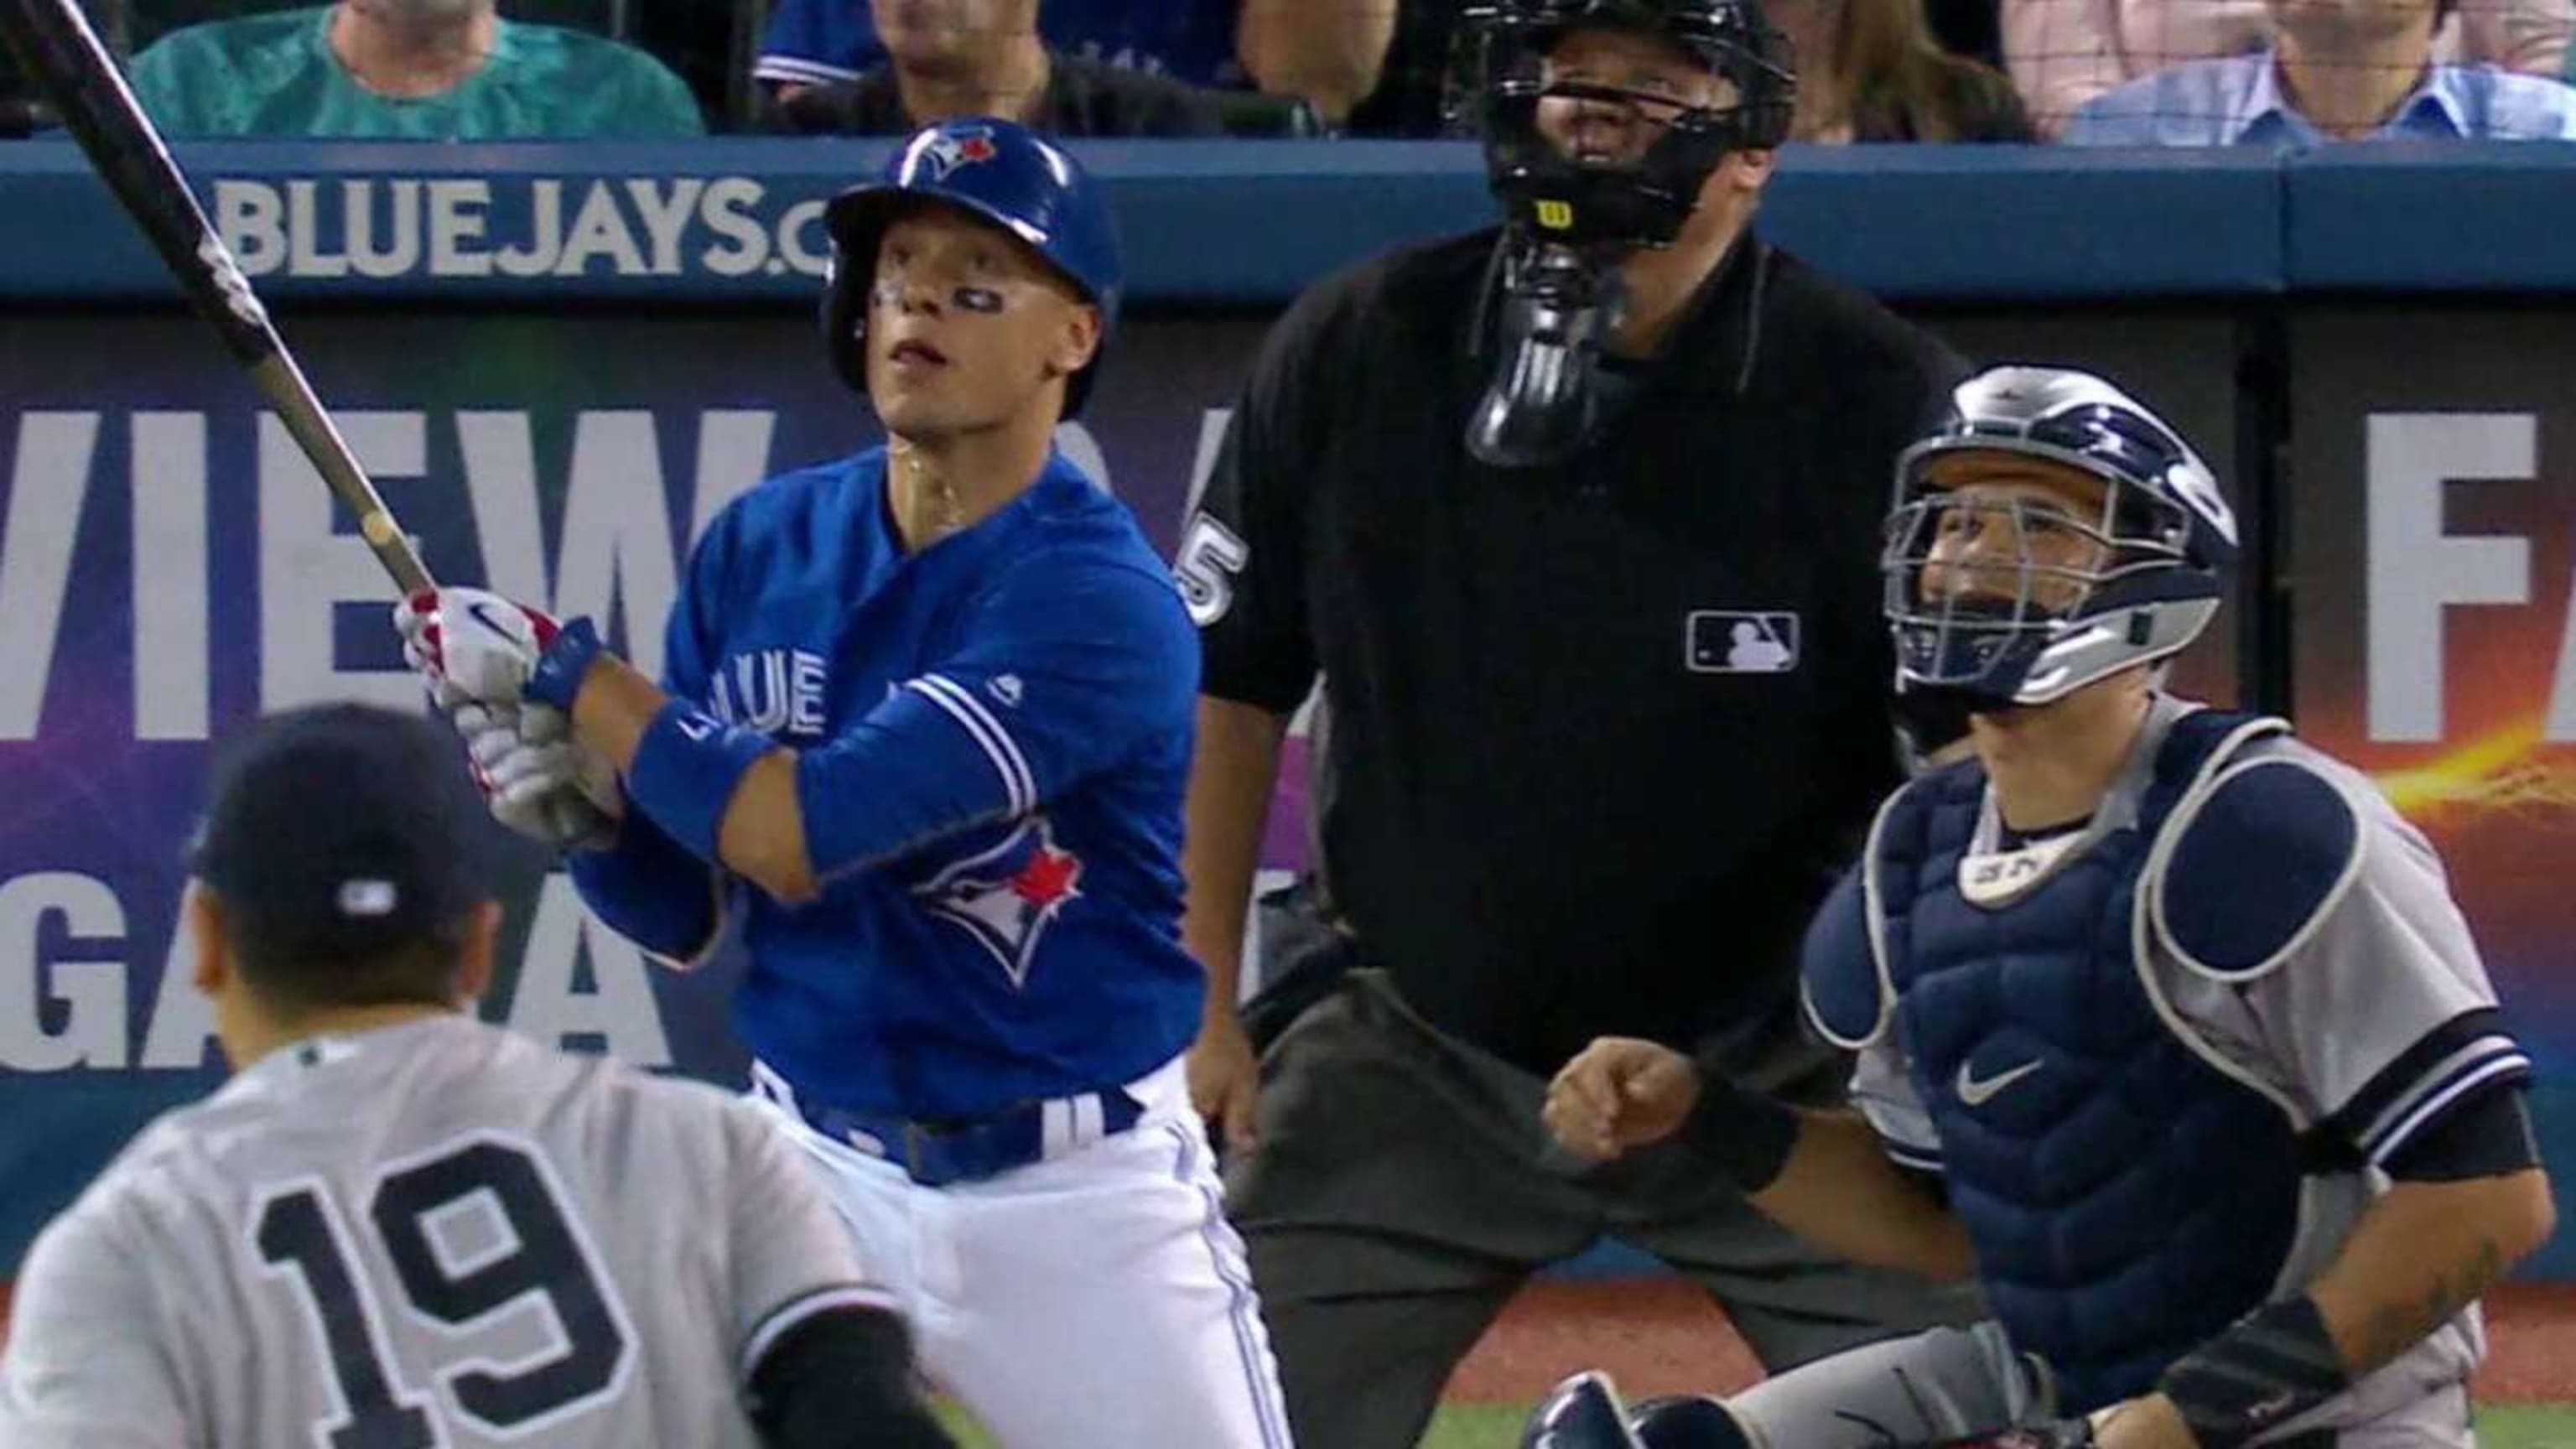 TORONTO — Ryan Goins made Todd Frazier pay for what the New